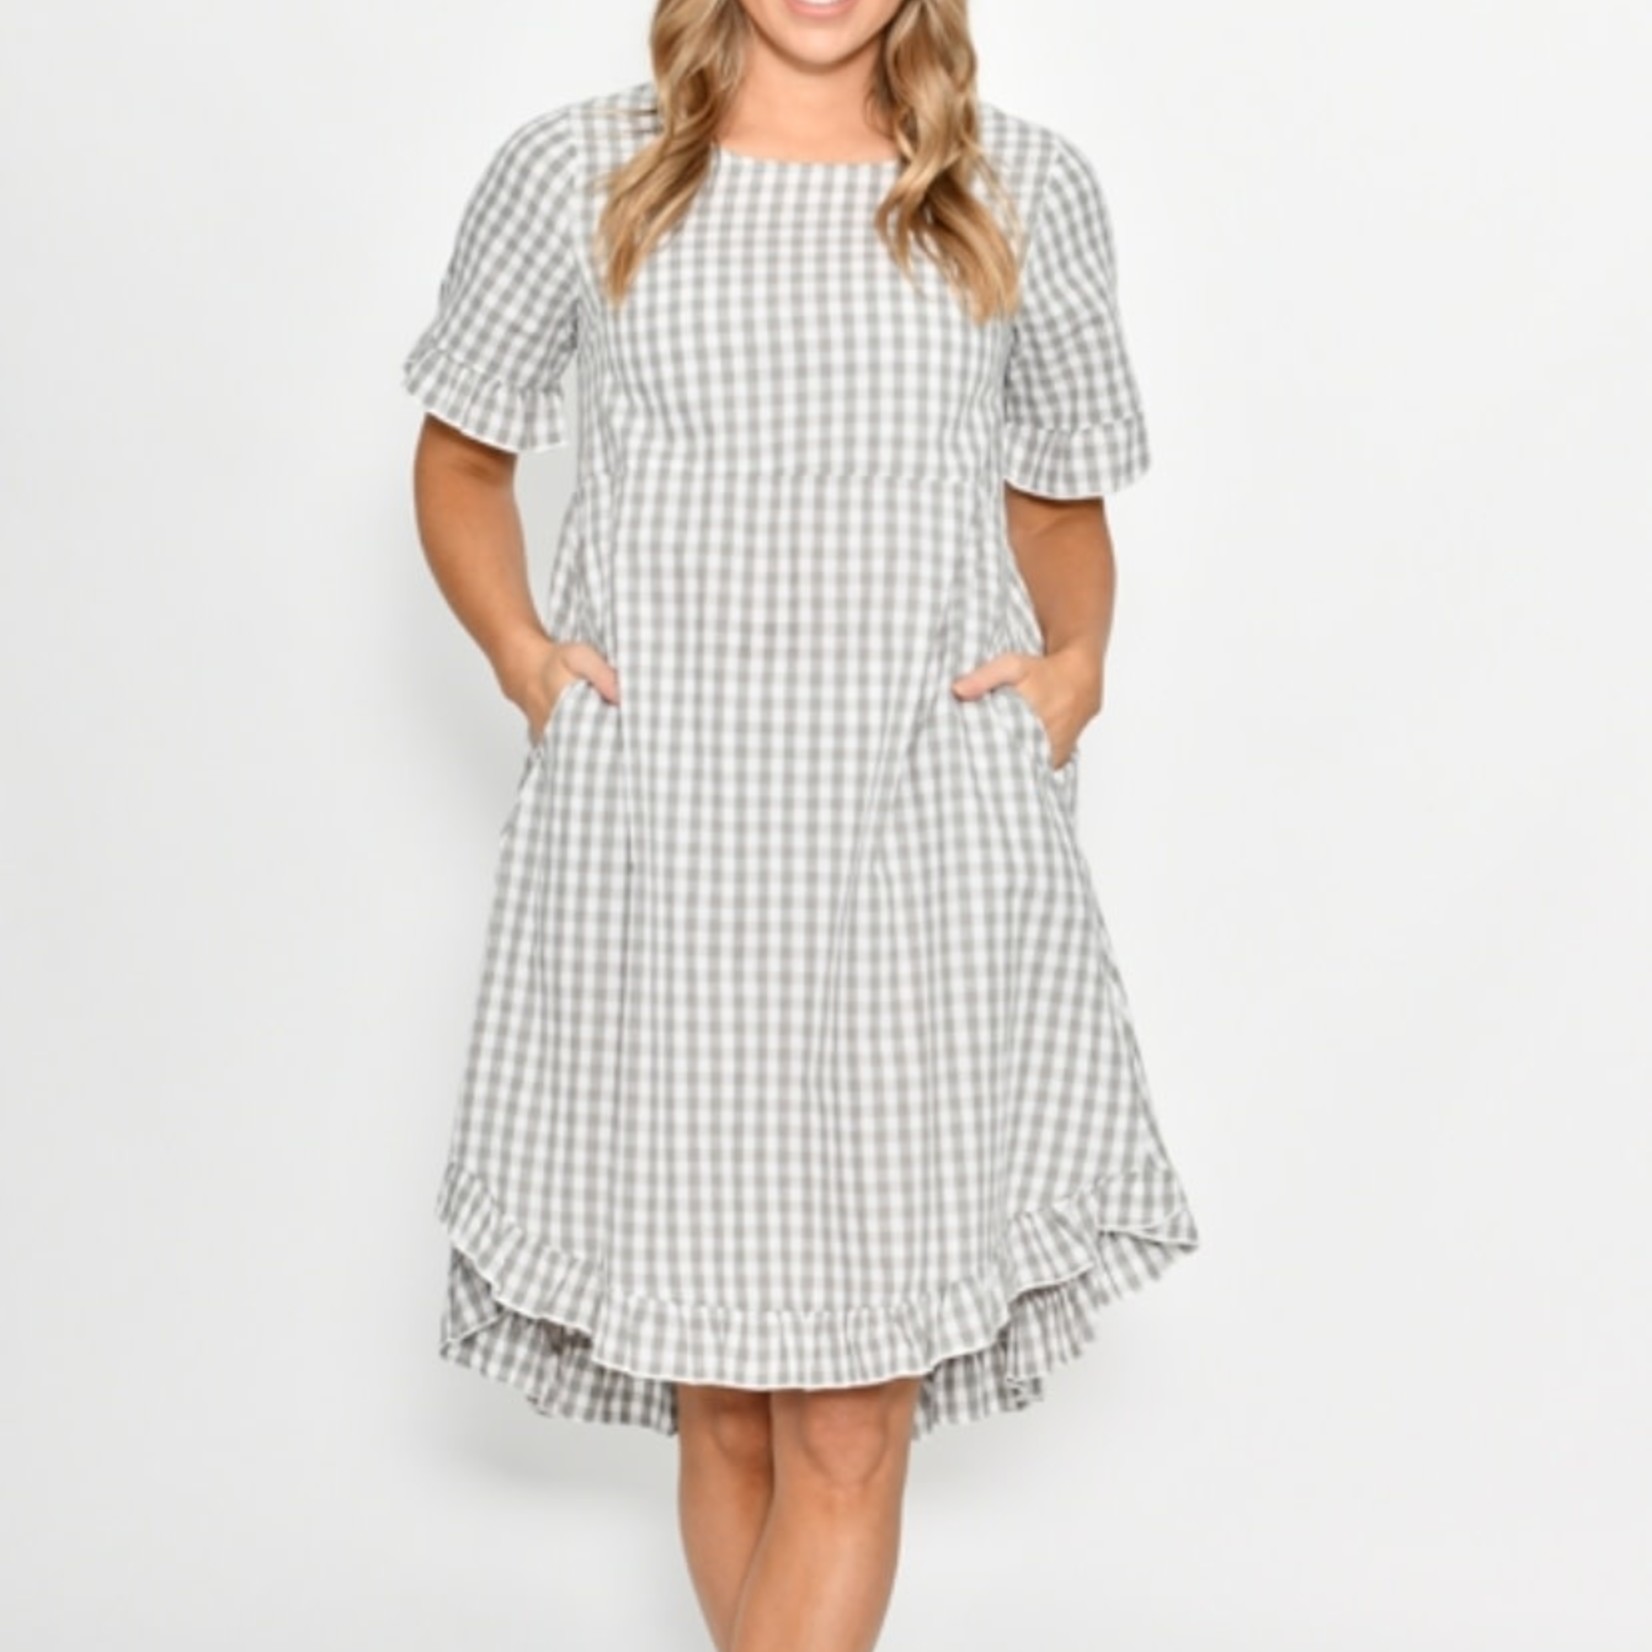 Cali & Co Button Back Cotton Frill Grey Gingham Dress